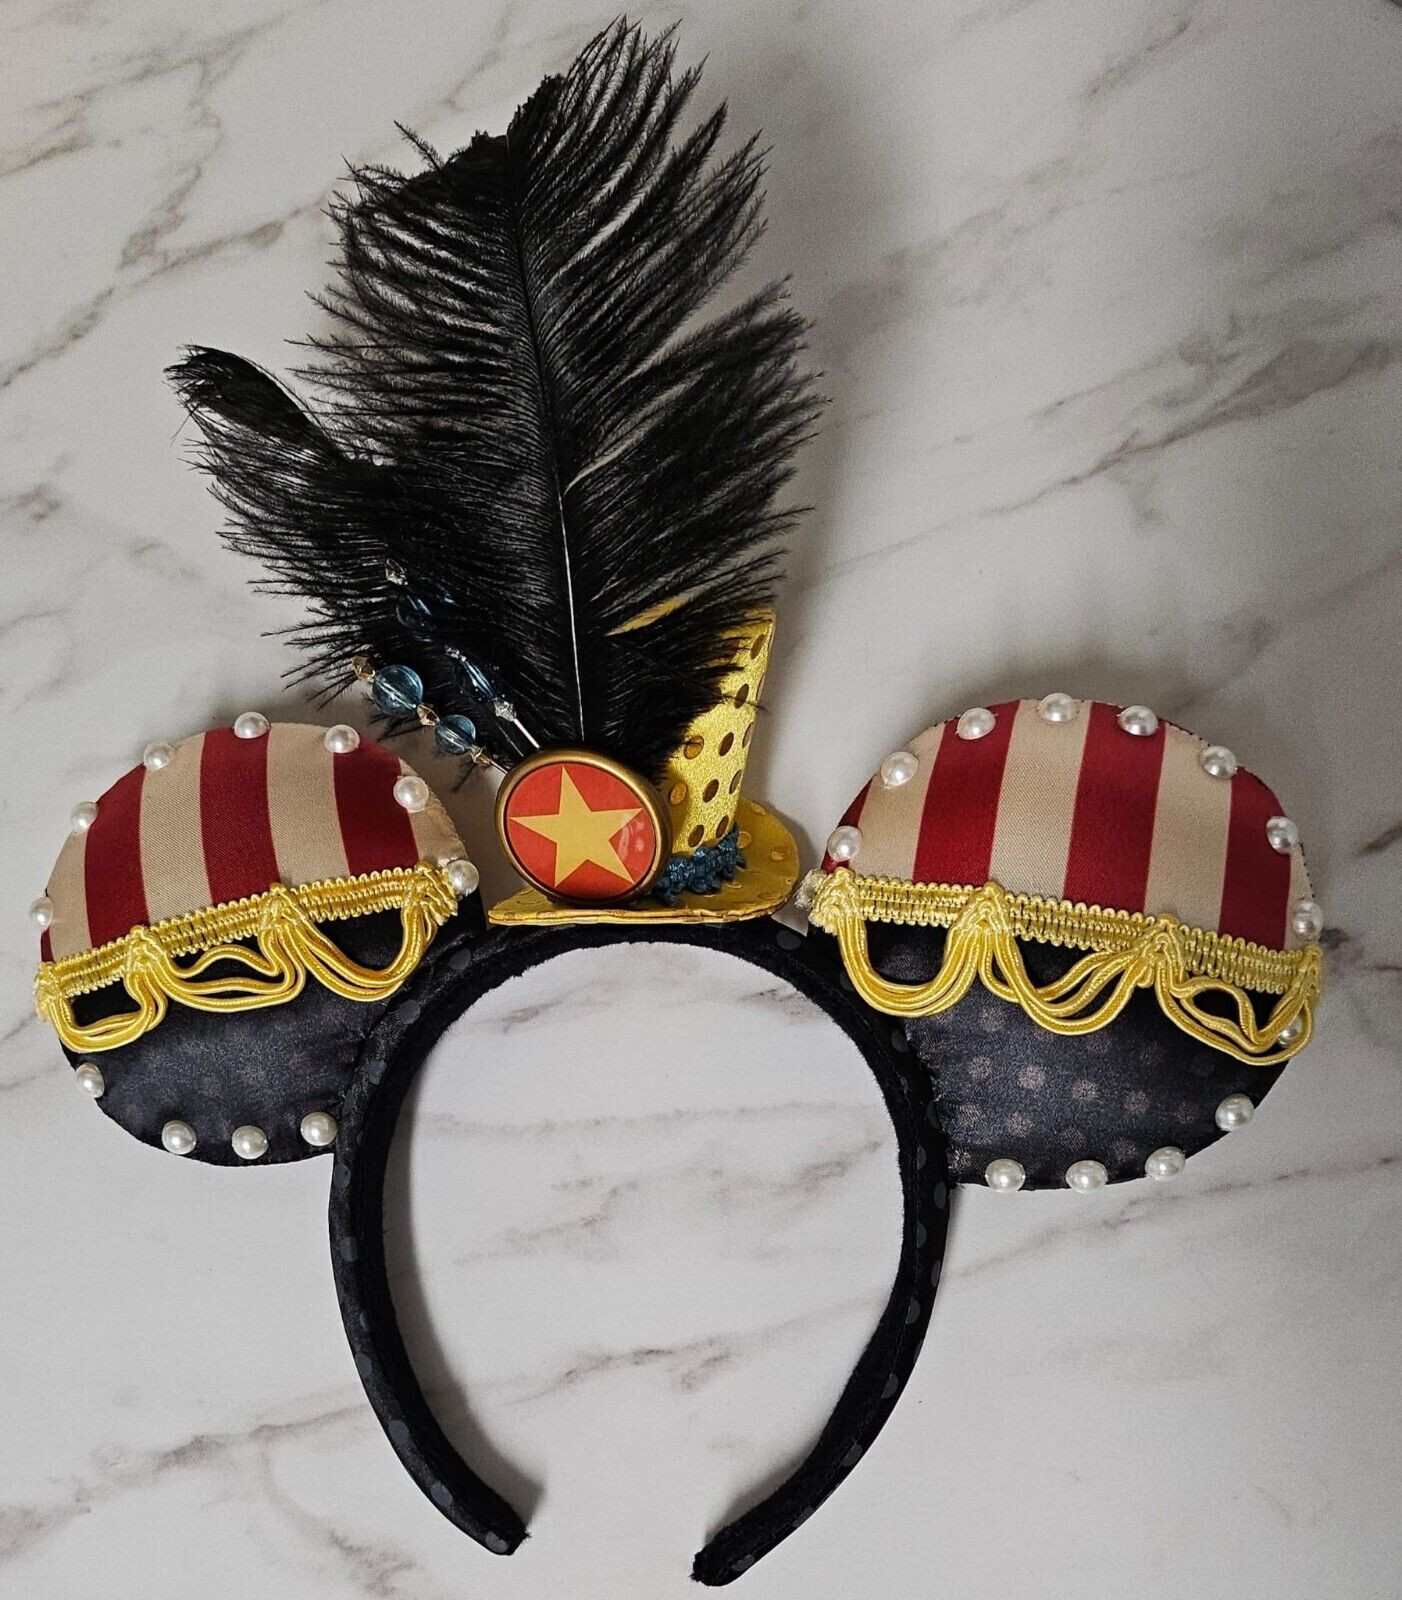 VINTAGE DISNEY MICKEY MOUSE EARS HEADBAND BAND DIRECTOR FEATHERS PEARLS TOP HAT